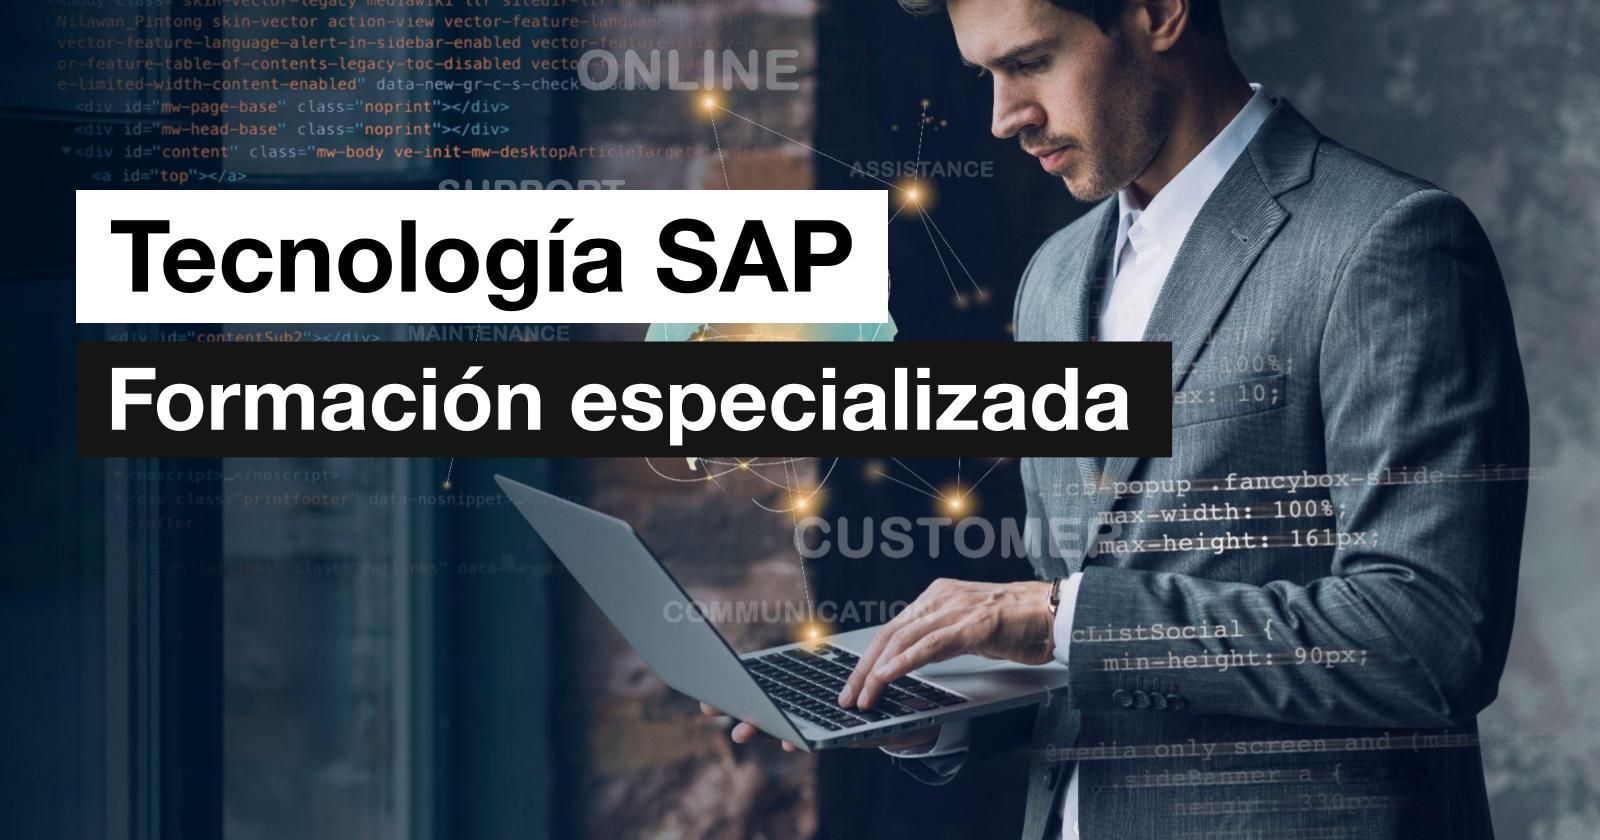 25 Free Specialized Training Courses in SAP Technology – Extremadura Empresacial